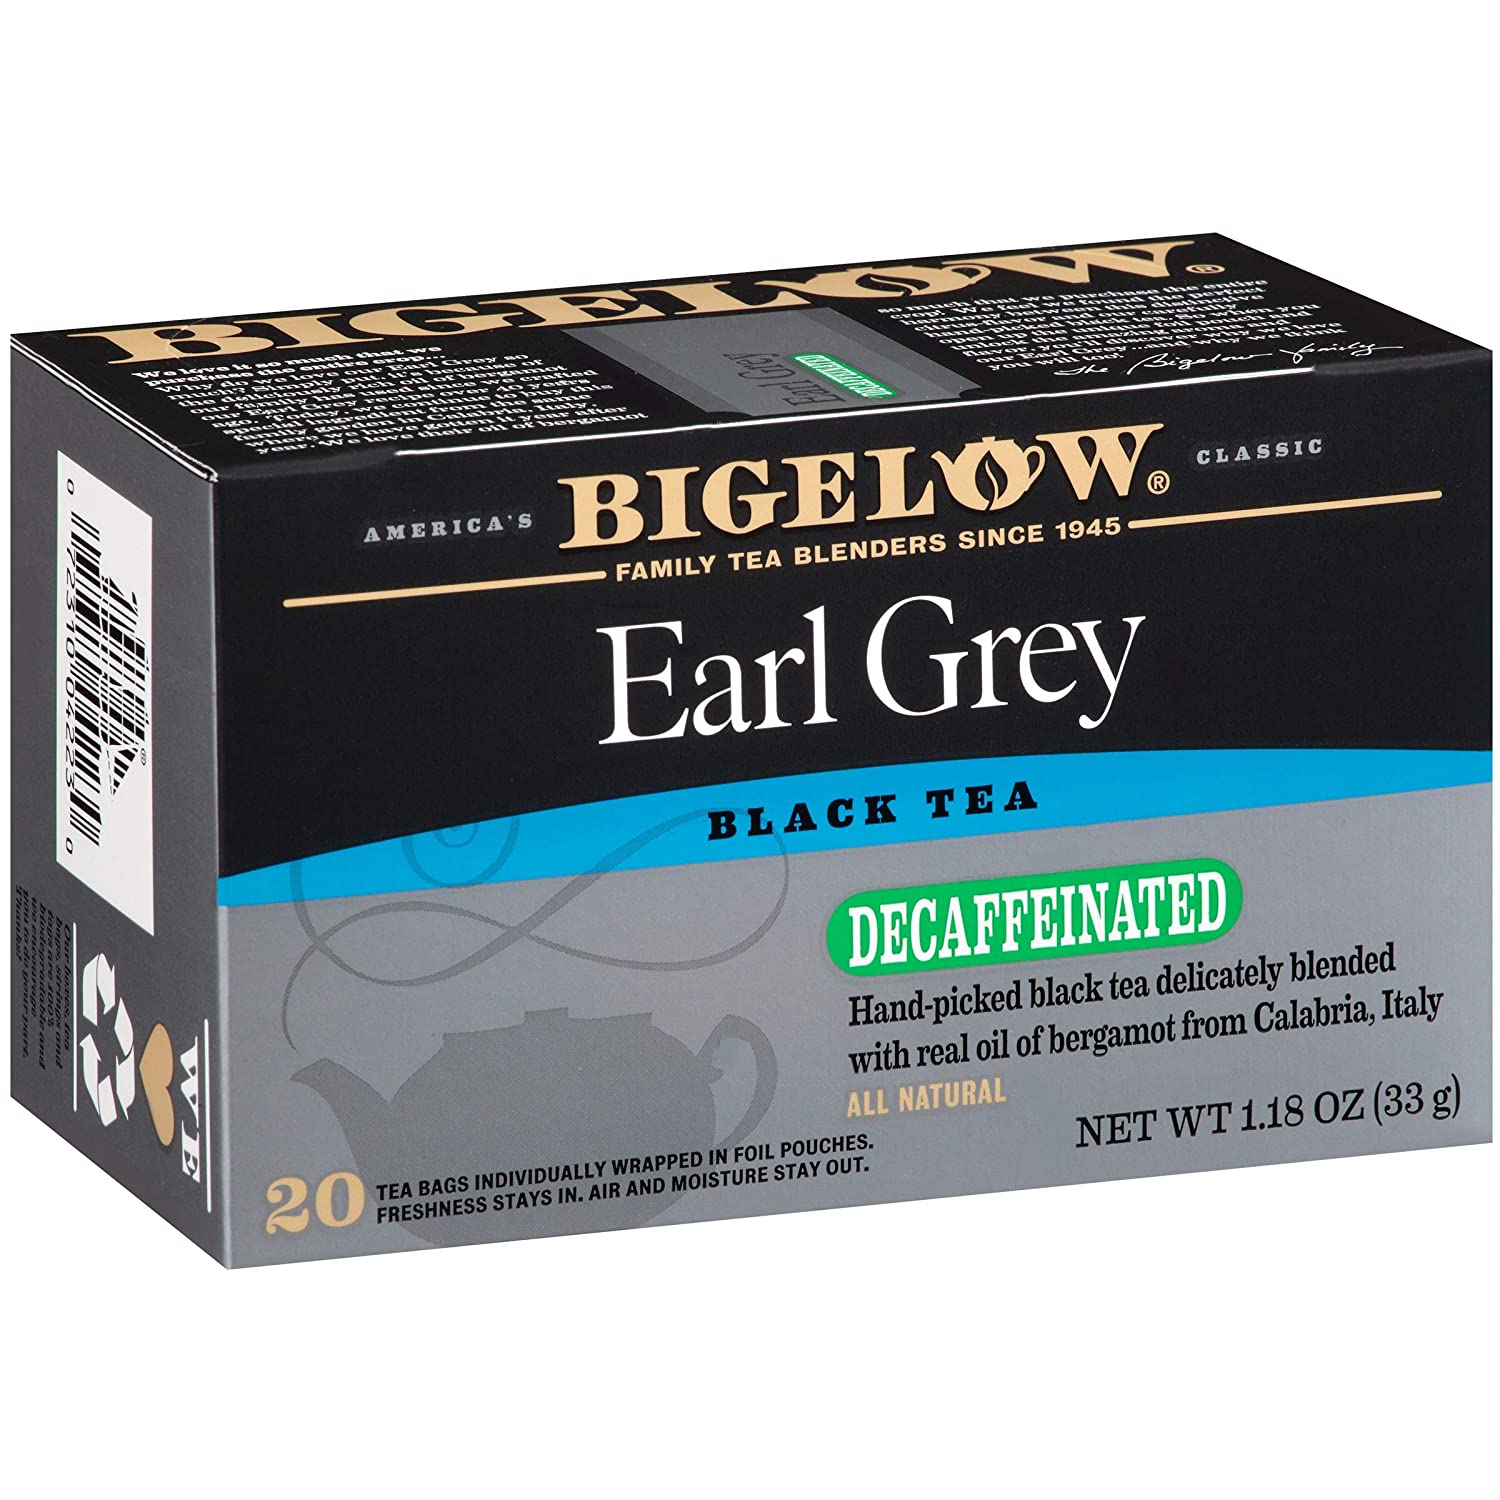 Bigelow Earl Grey Decaf Black Tea Bags 20 Count Boxes (6 Pack) $5.94 w/ 15% S &S, $7.54 w/5% S&S & Coupon